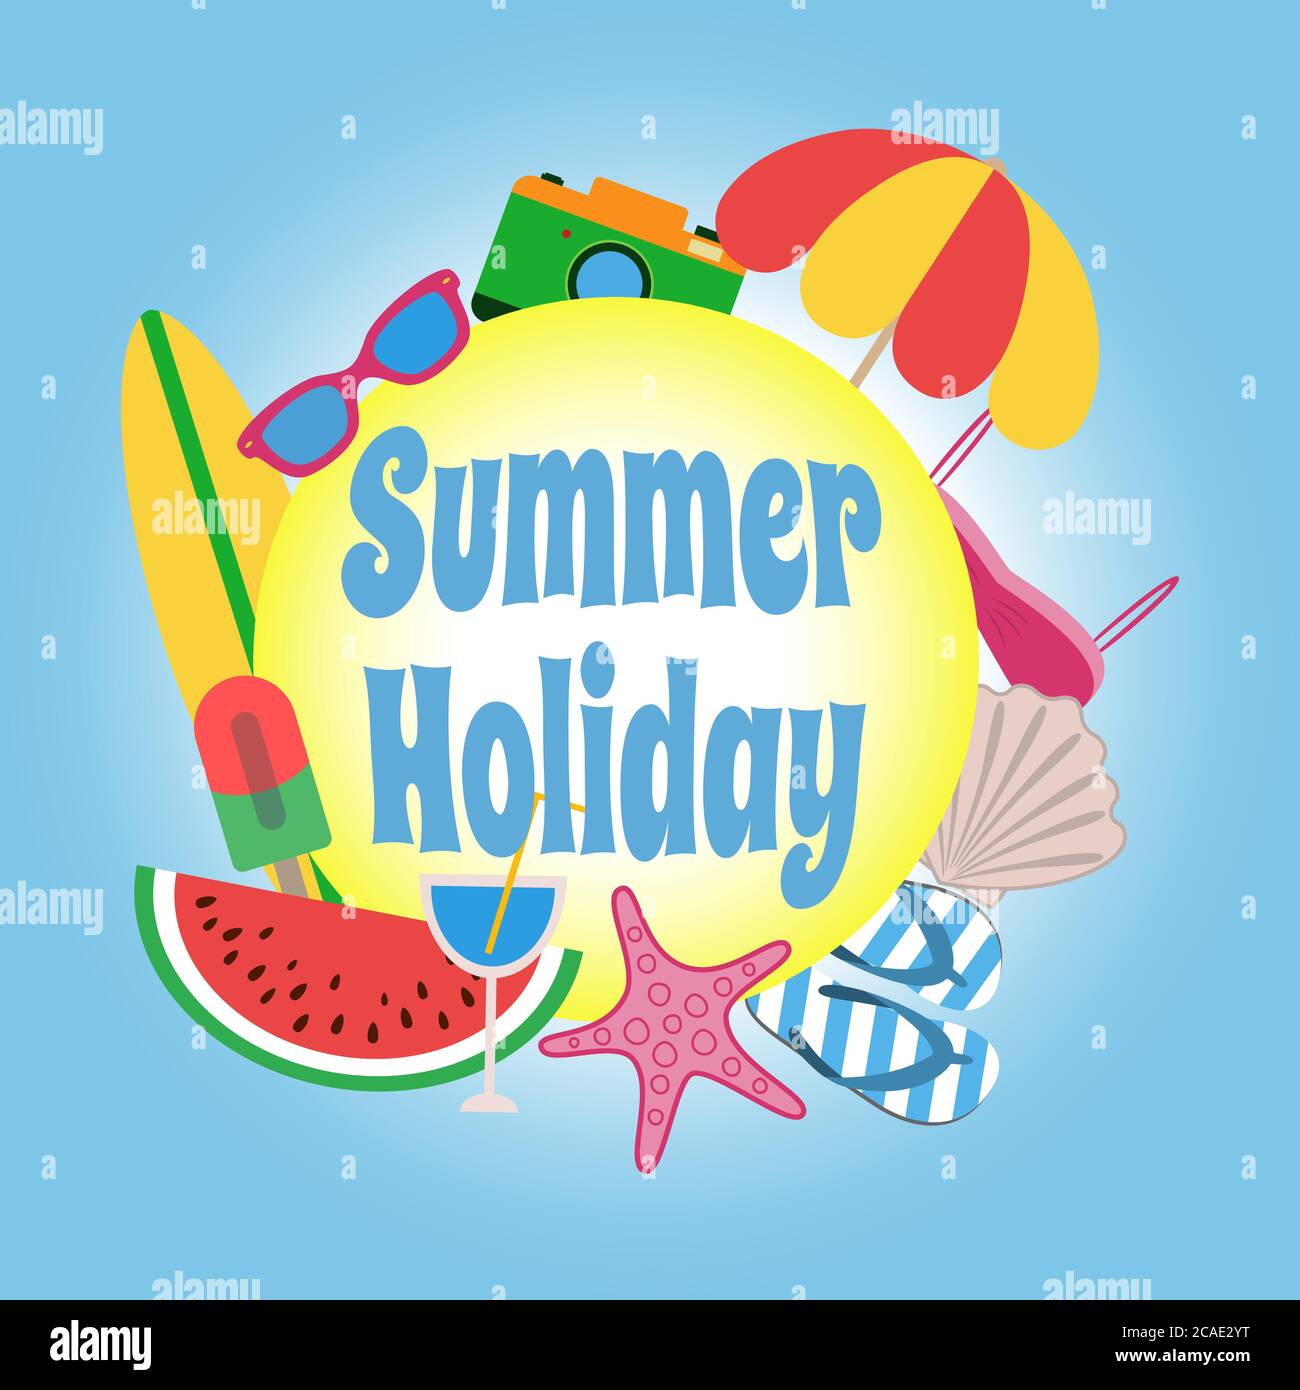 Summer holiday. Circle banner design with colorful beach elements on blue background Stock Vector